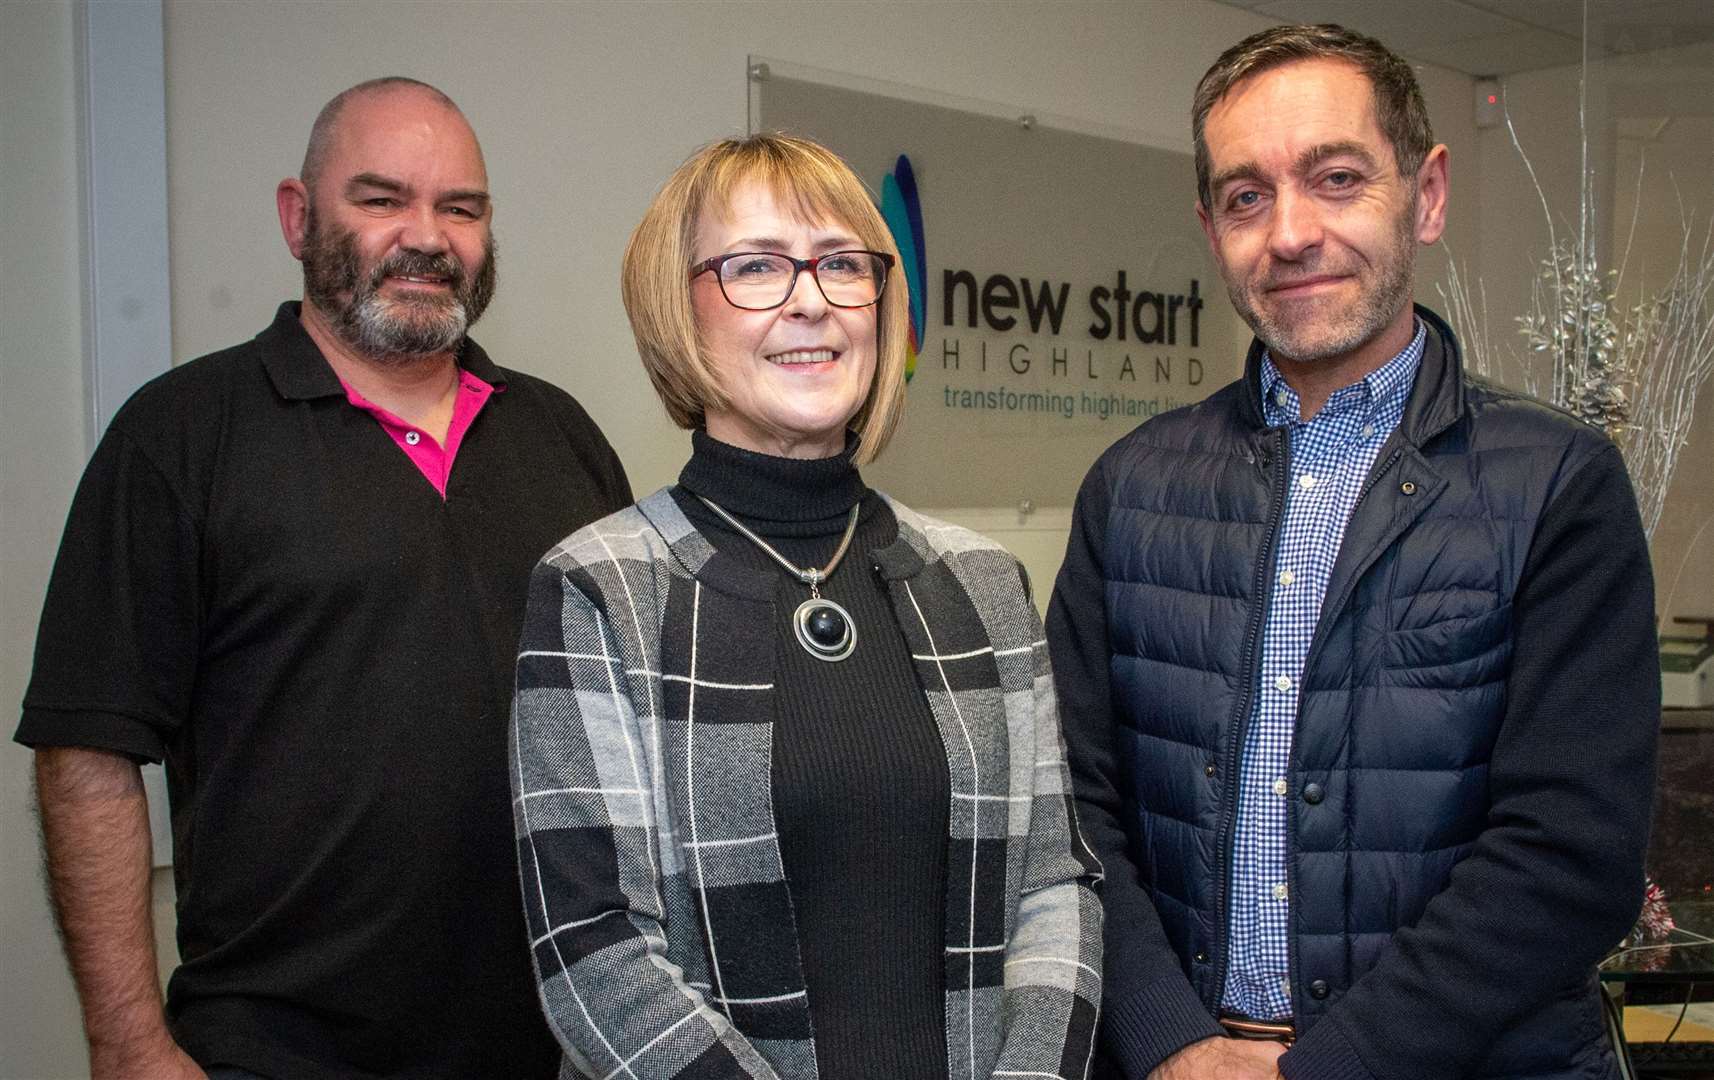 Simon Williamson, affordable warmth adviser with the new project, with Mairi Macaulay, deputy chief executive at New Start Highland, and chief executive James Dunbar.